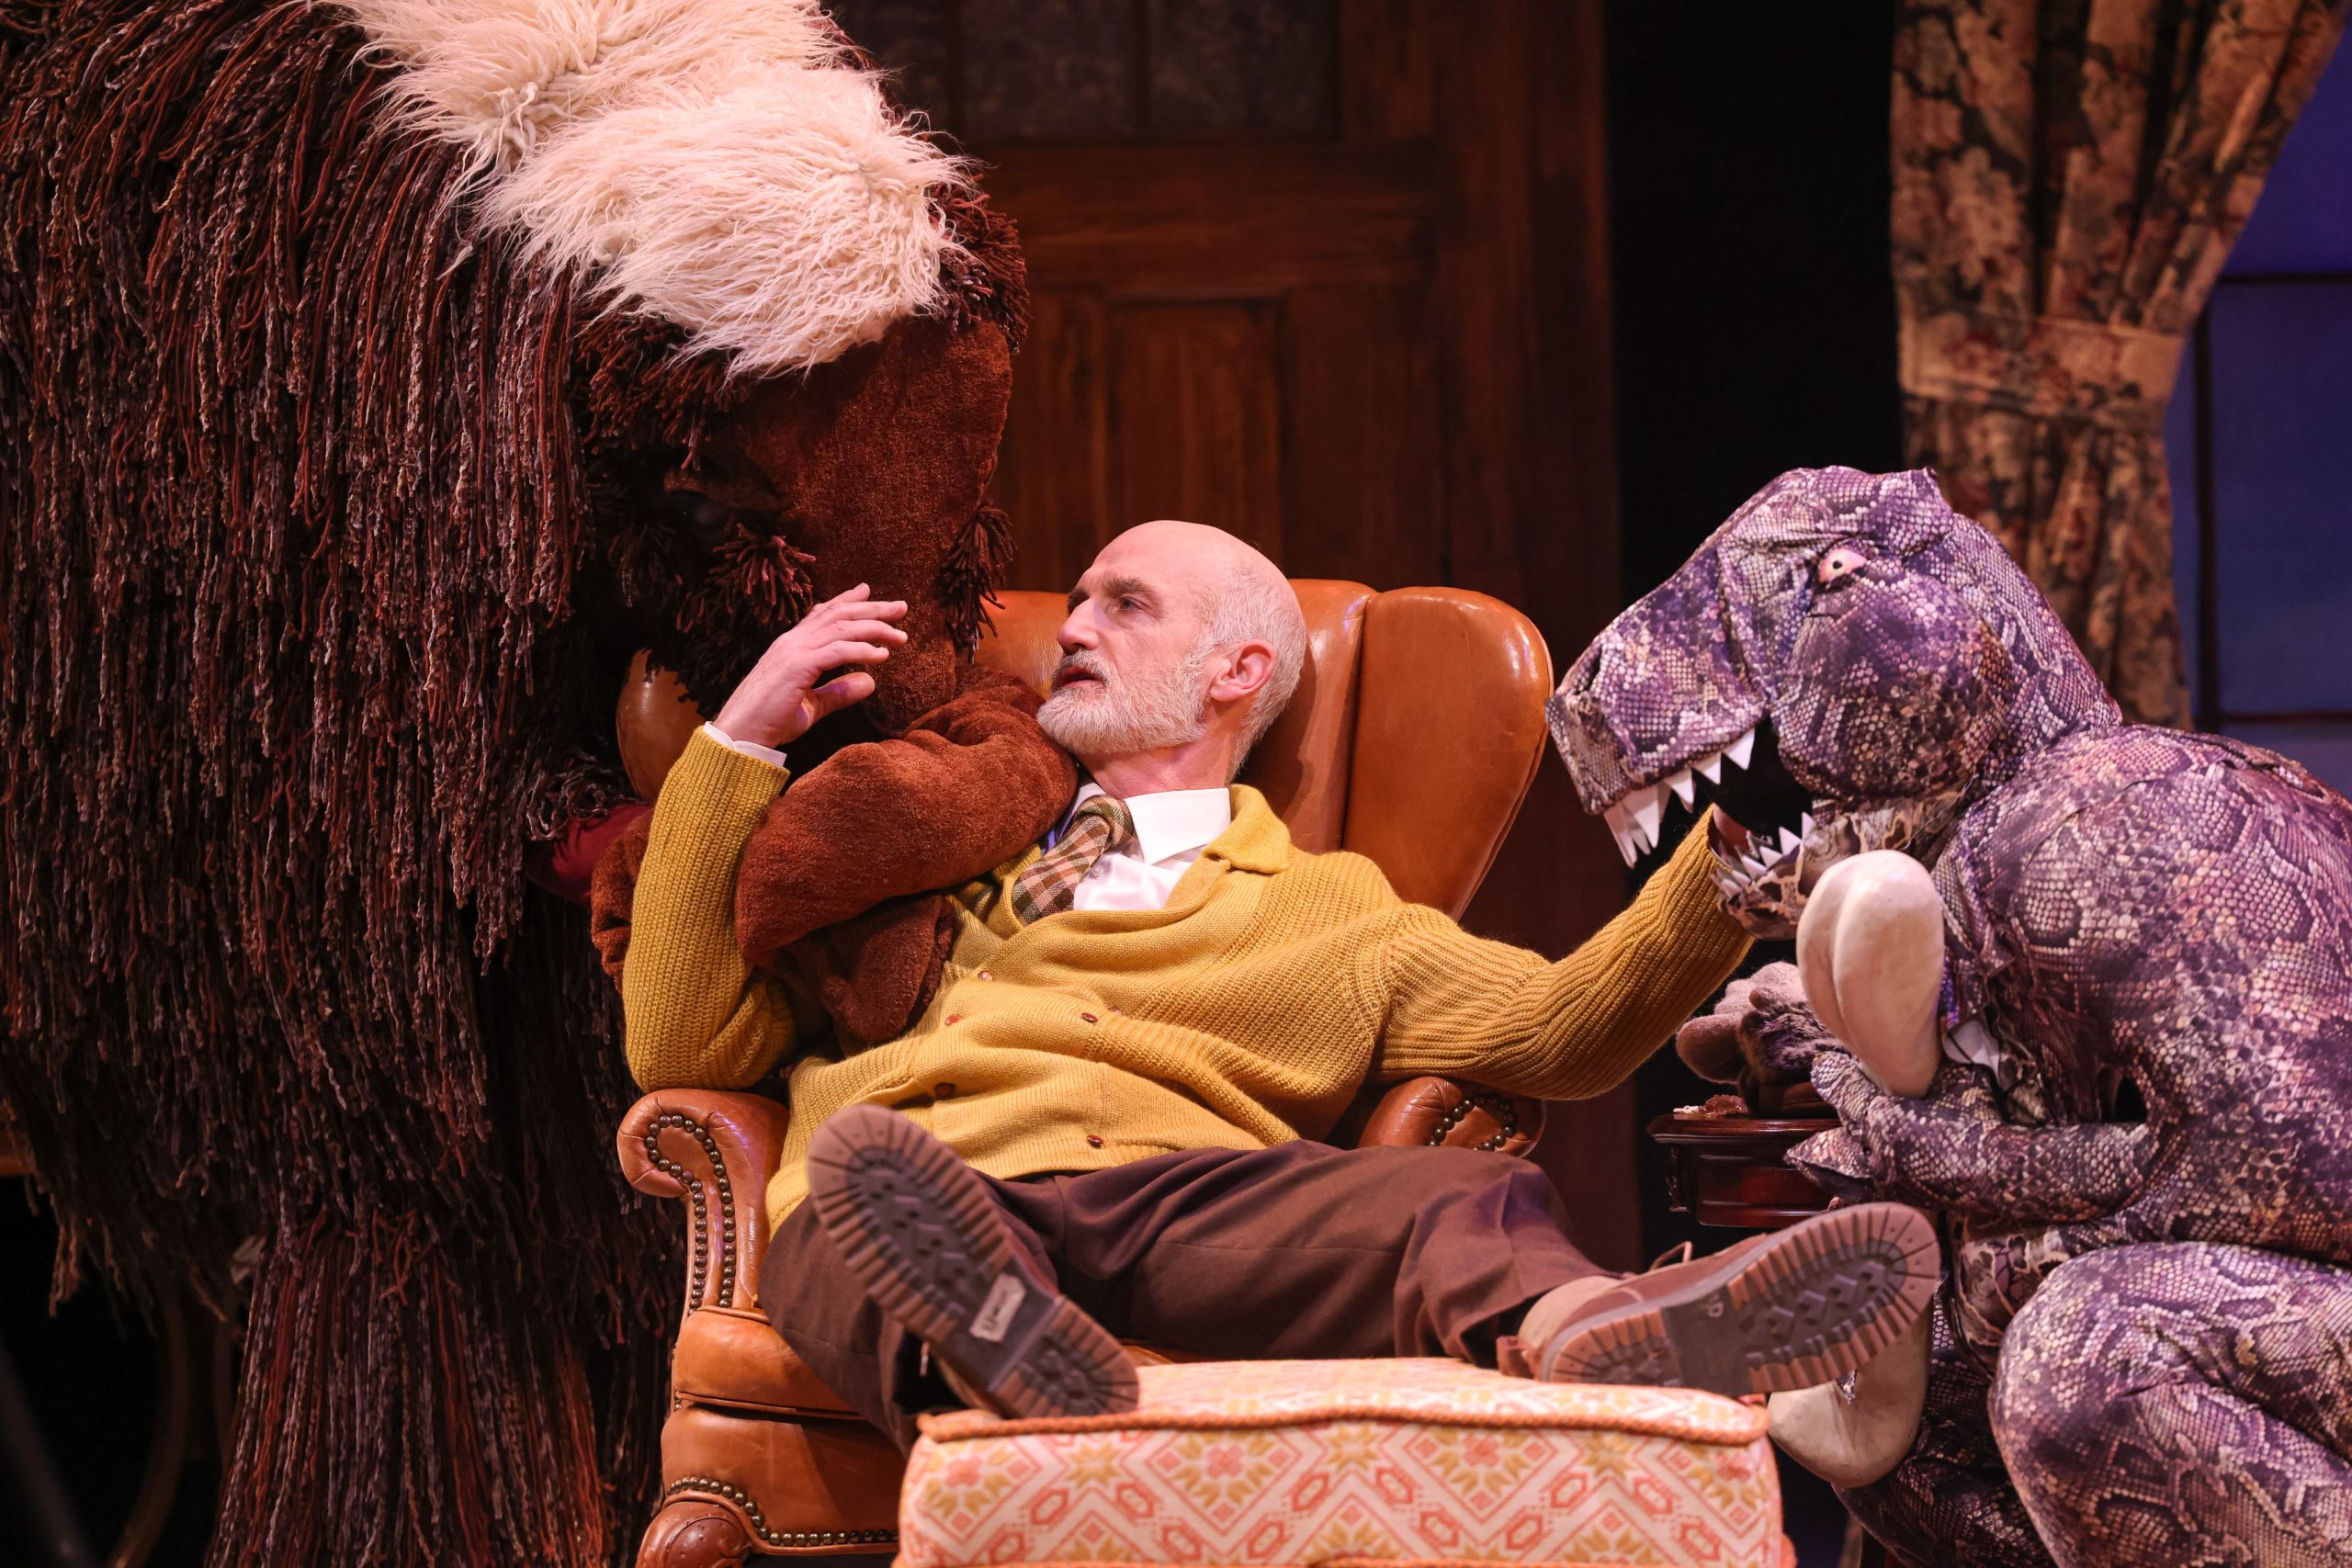 A wooly mammoth and a dinosaur make an appearance in Act 1 of the play.